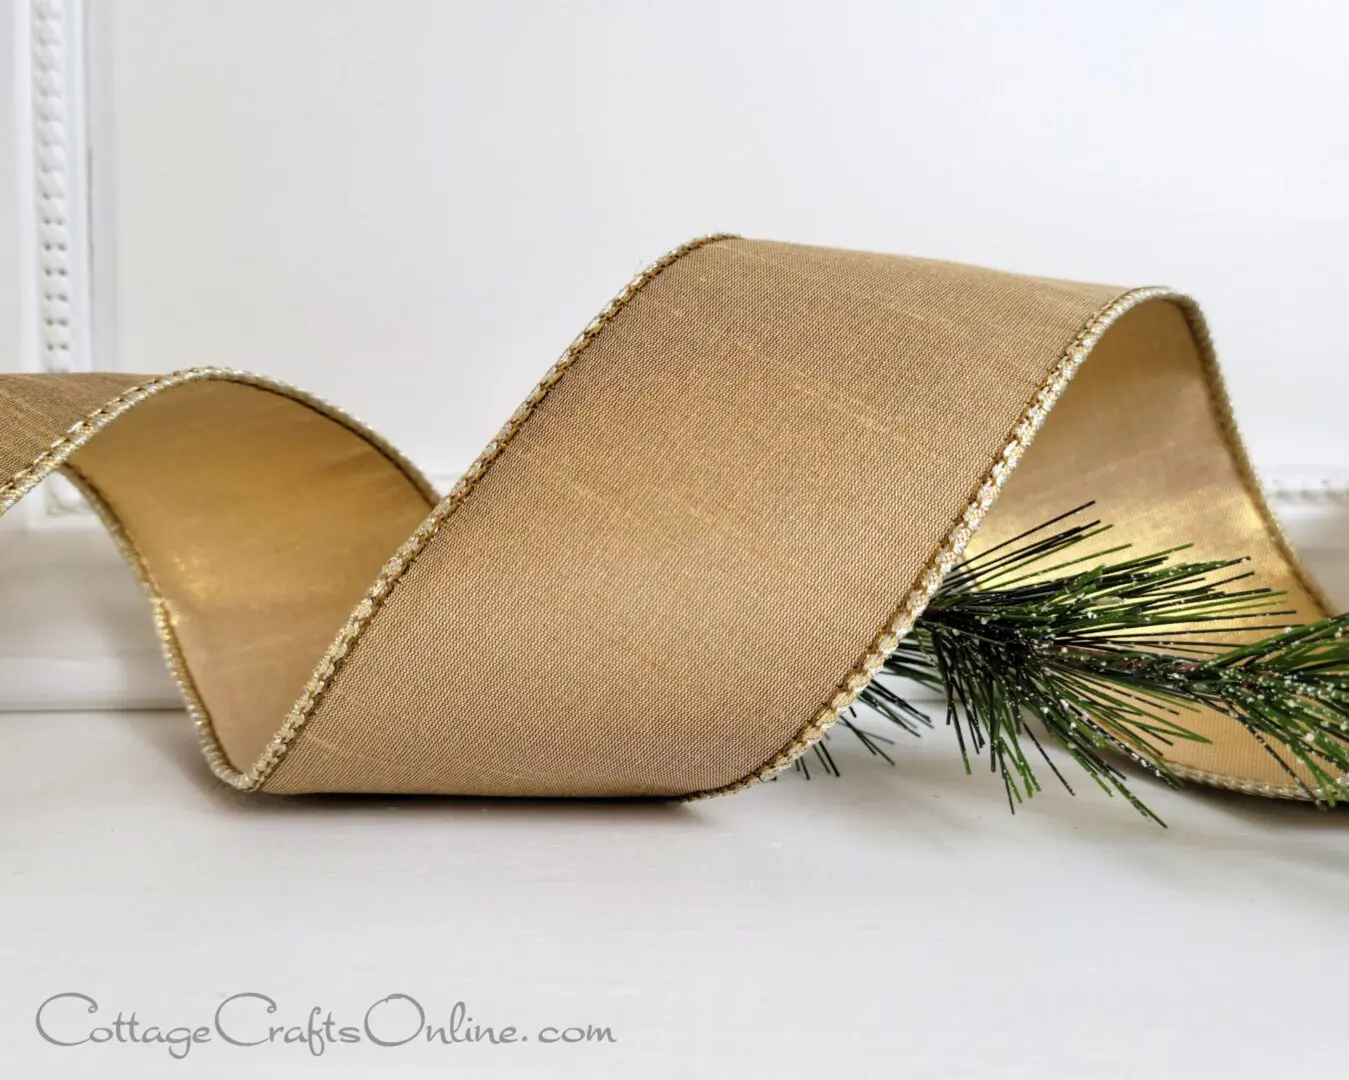 A close up of a ribbon with pine needles